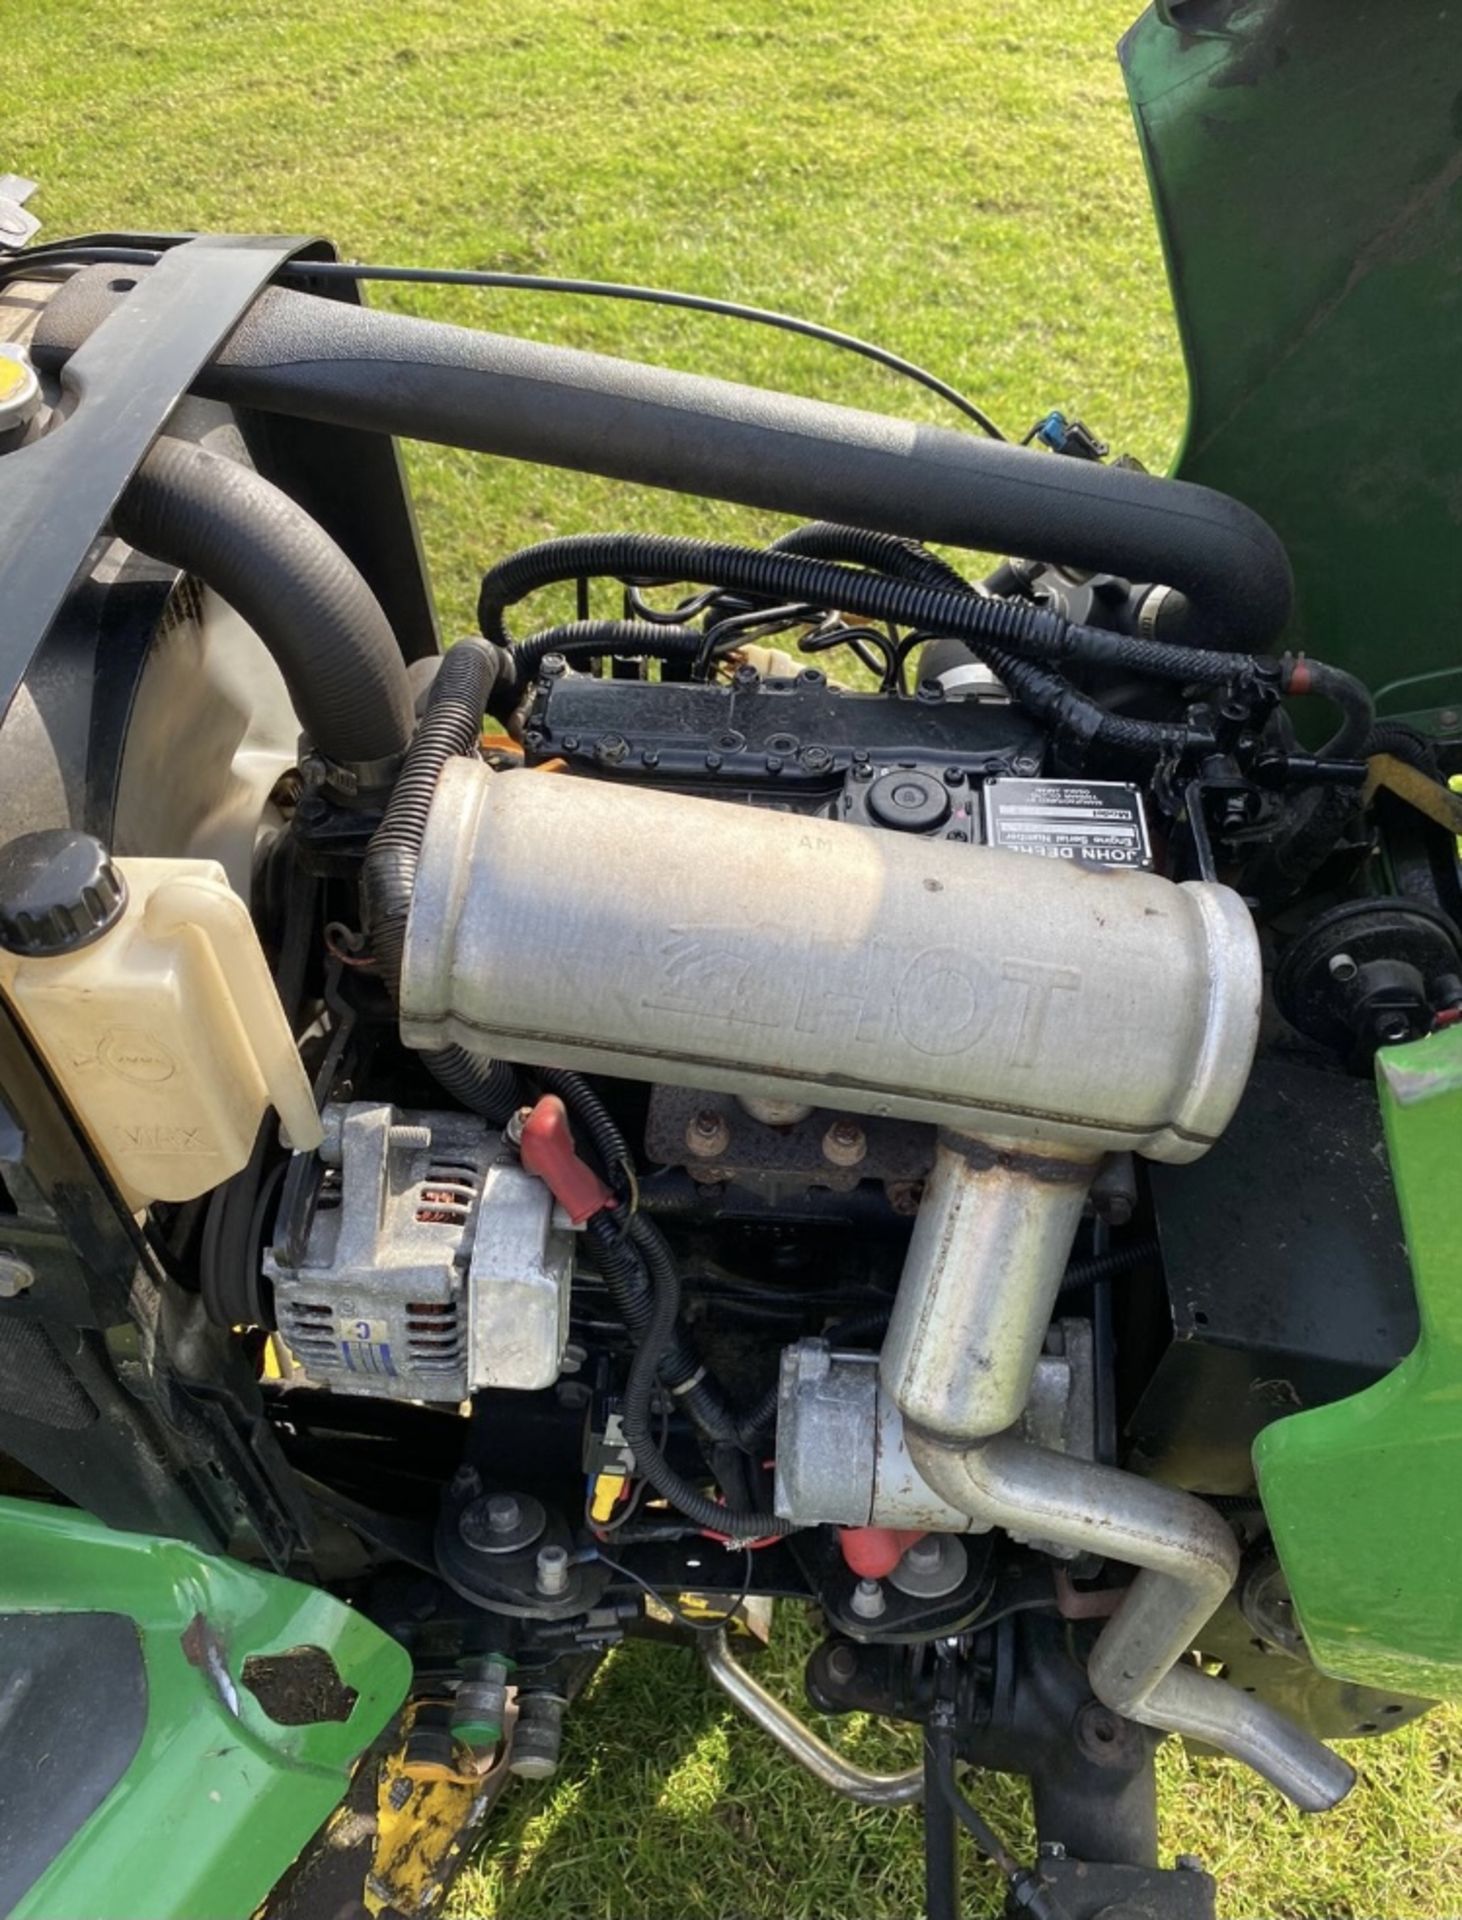 JOHN DEERE X748 DIESEL 4WD COMPANY TRACTOR RIDE ON MOWER LOCATION NORTH YORKSHIRE - Image 6 of 6